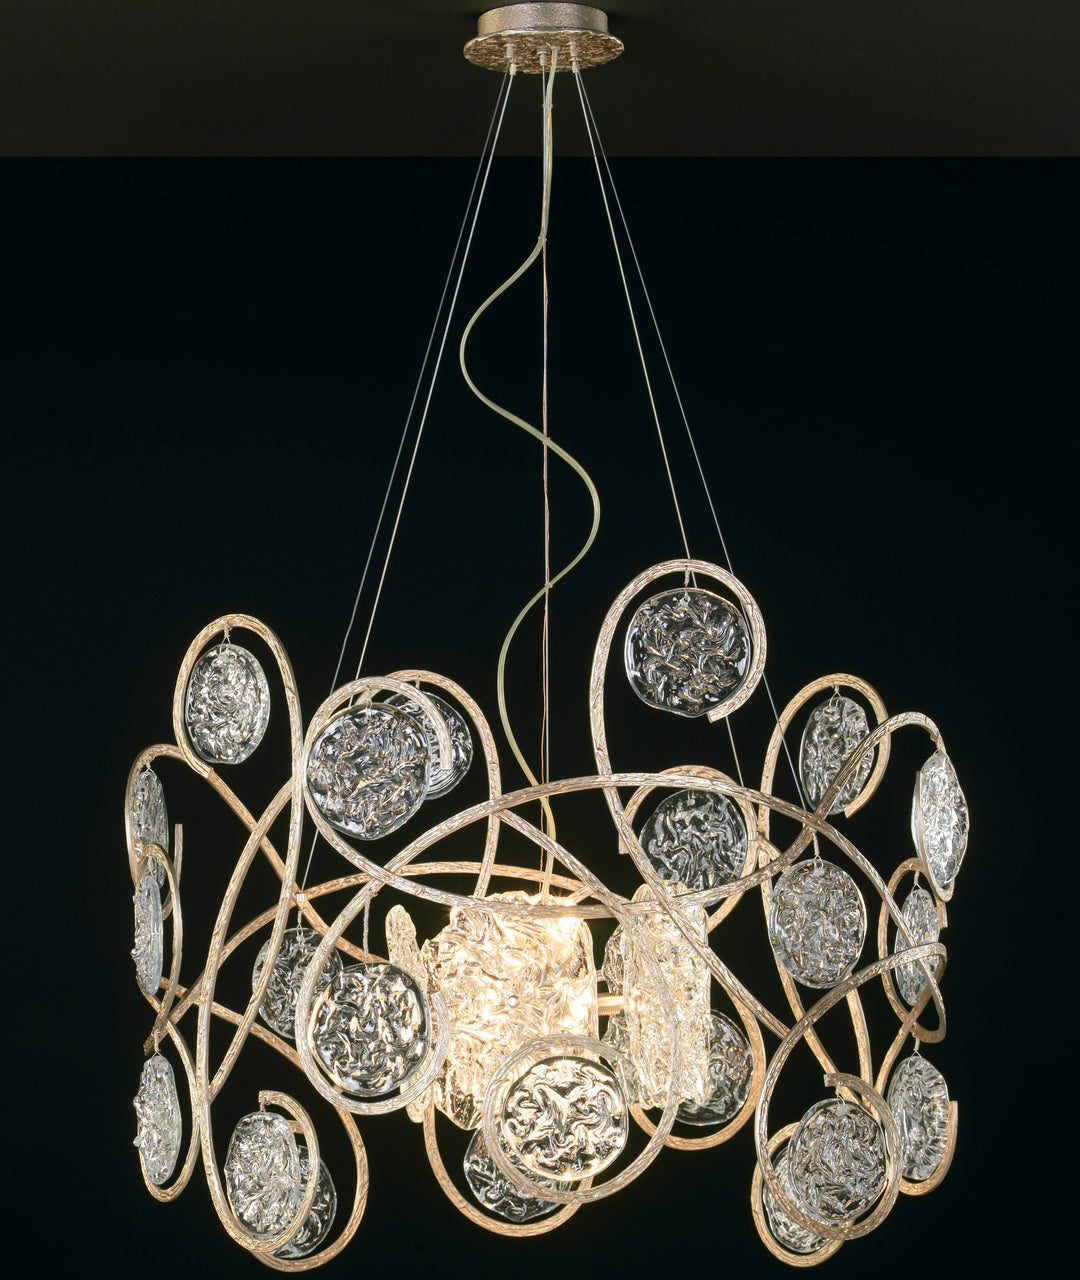 Classic Lighting 10045 WB Celeste Artistic Chandelier in Winter Bronze (Imported from Portugal)